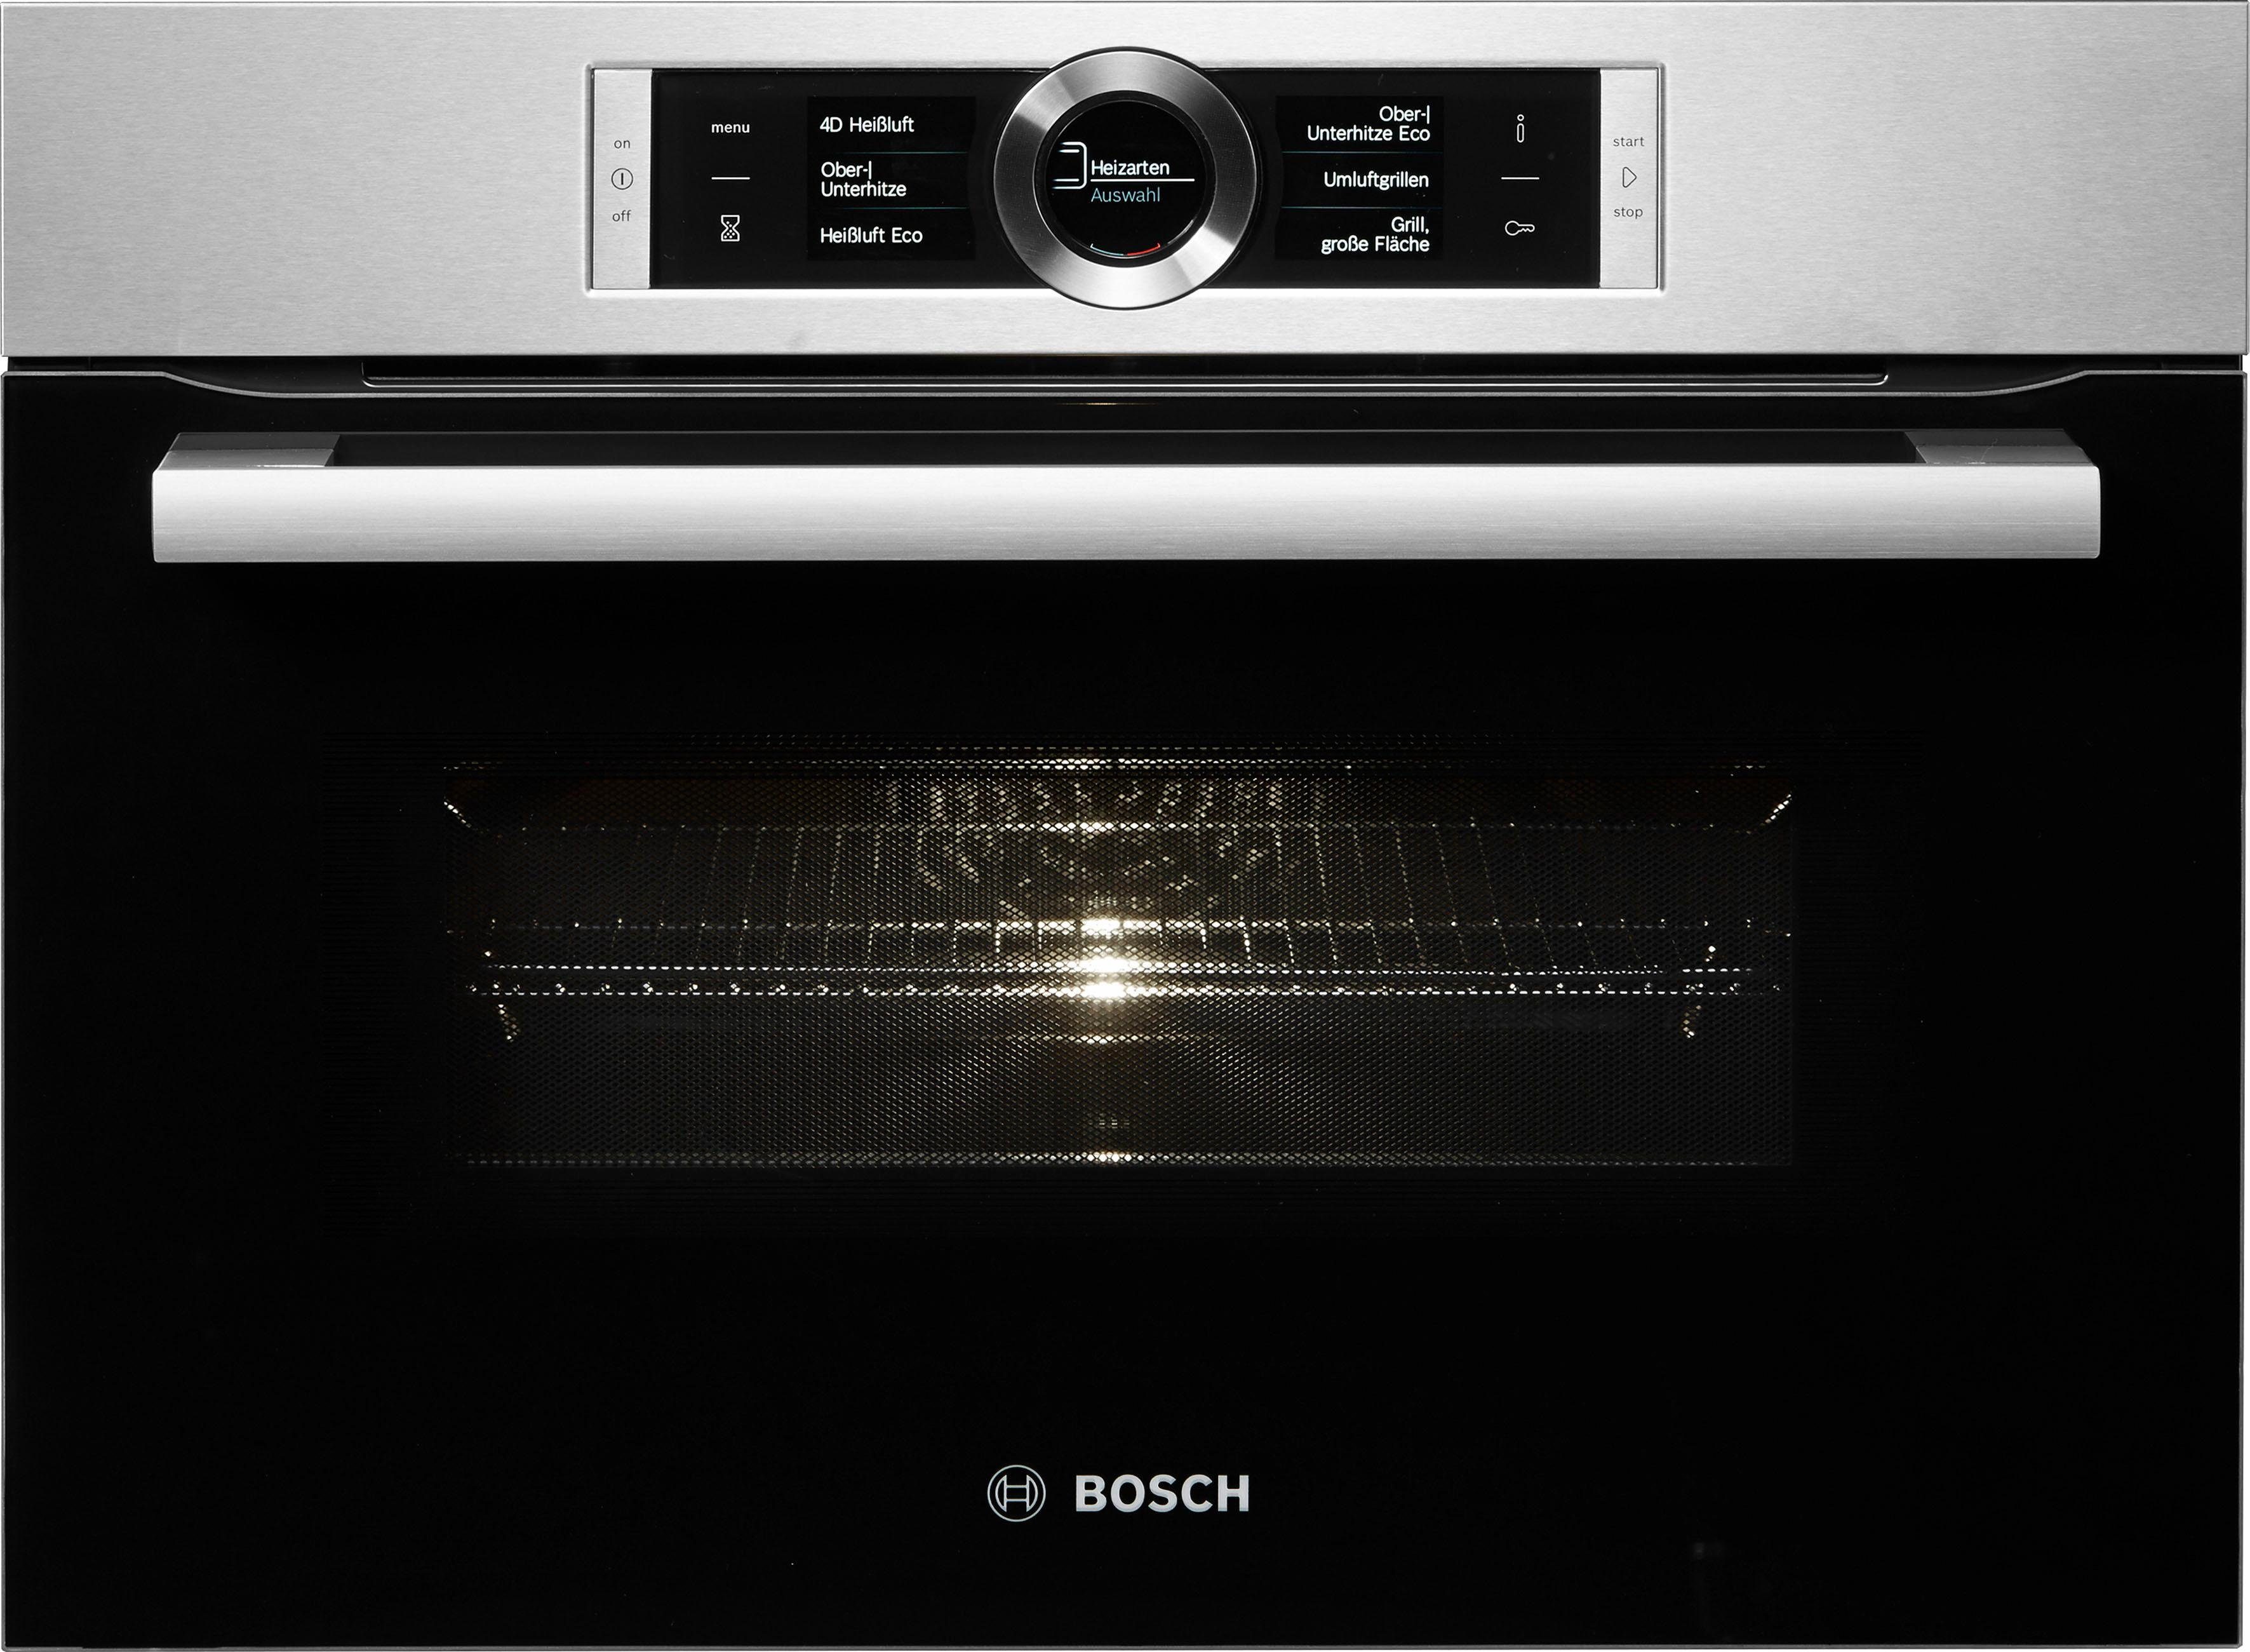 BOSCH Backofen mit Mikrowelle ecoClean Direct CMG636BS1